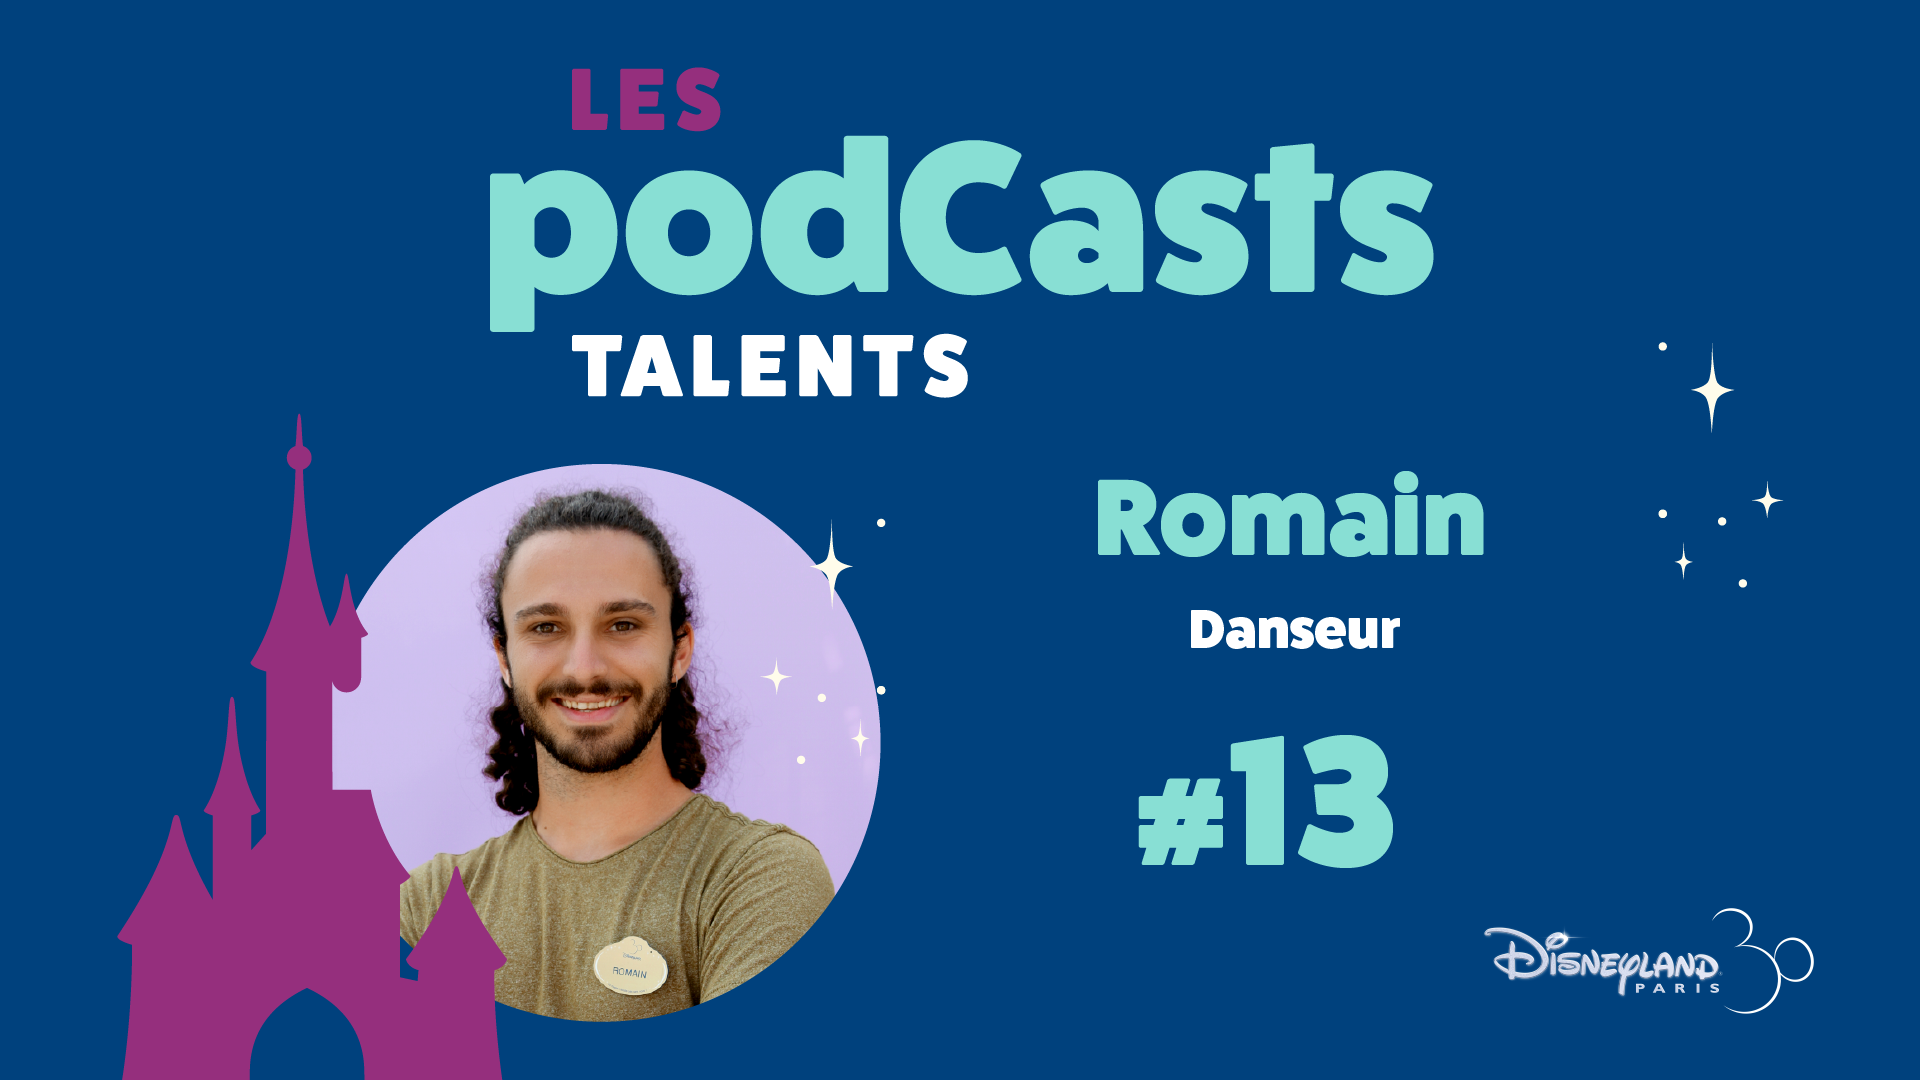 PODCASTS TALENTS : NOS CAST MEMBERS TEMOIGNENT